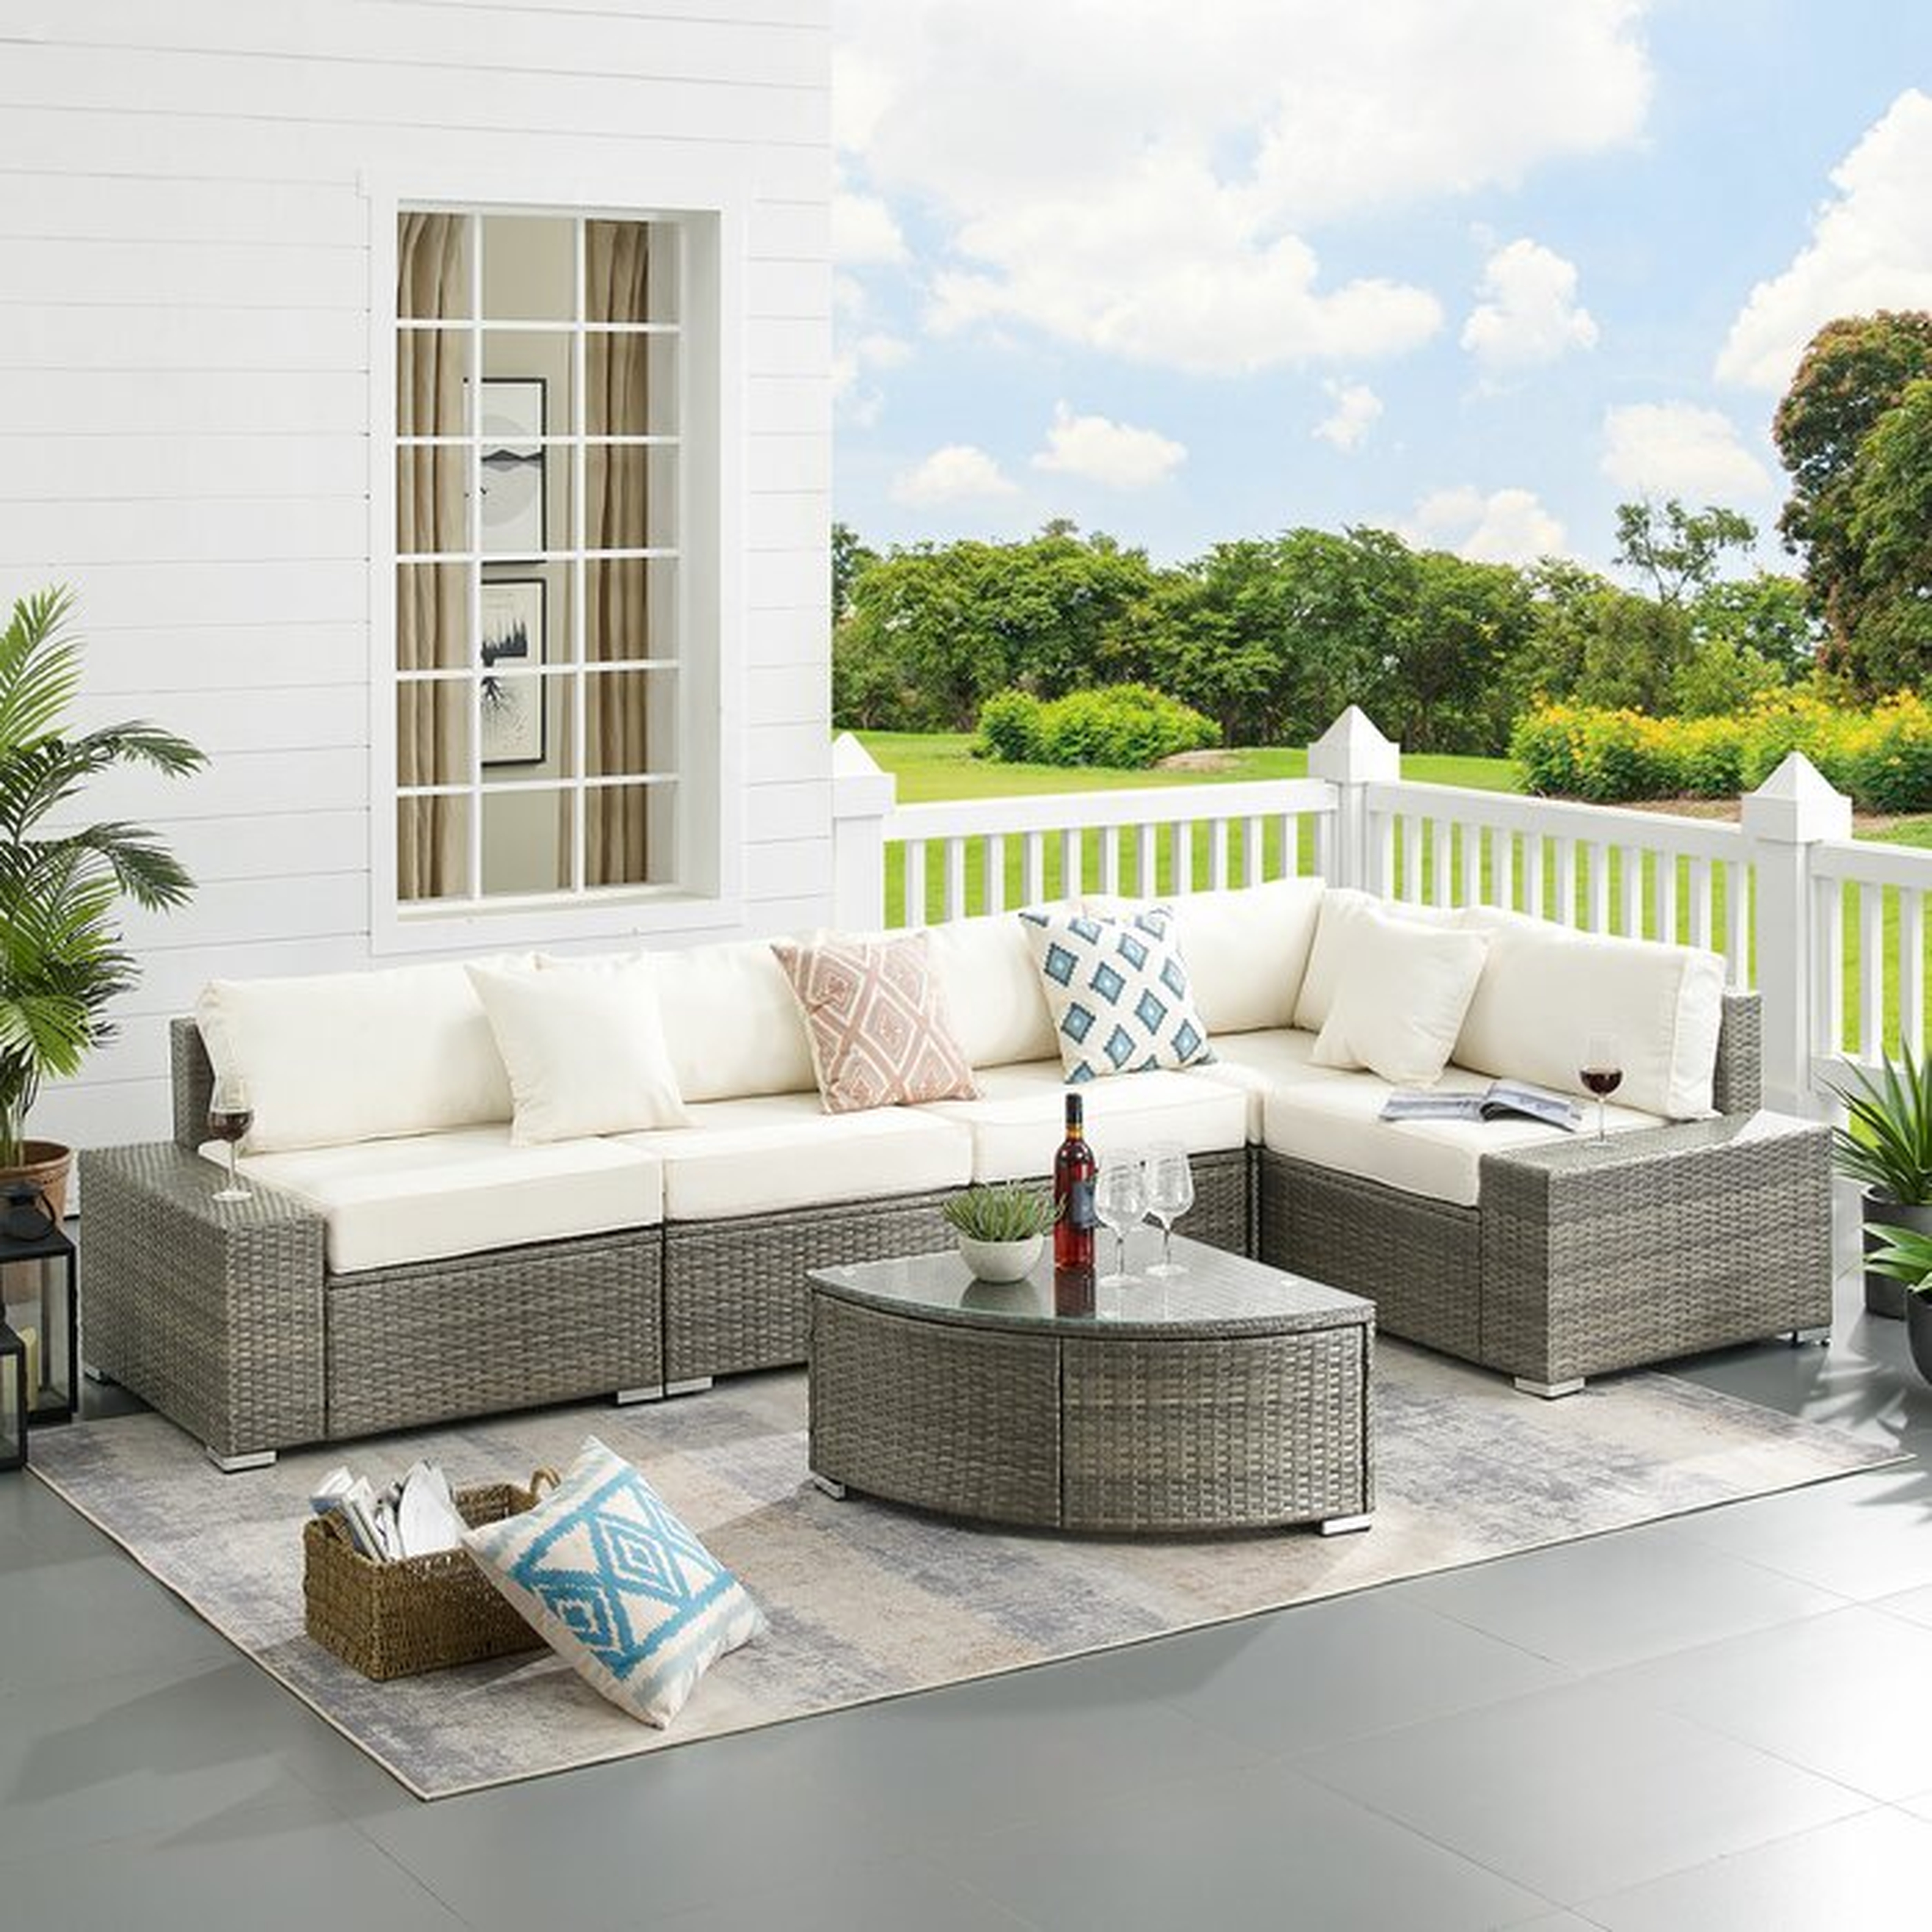 Aaleeya 6 Piece Rattan Sectional Seating Group with Cushions / Frame color: Gray/ Seats: Beige - Wayfair